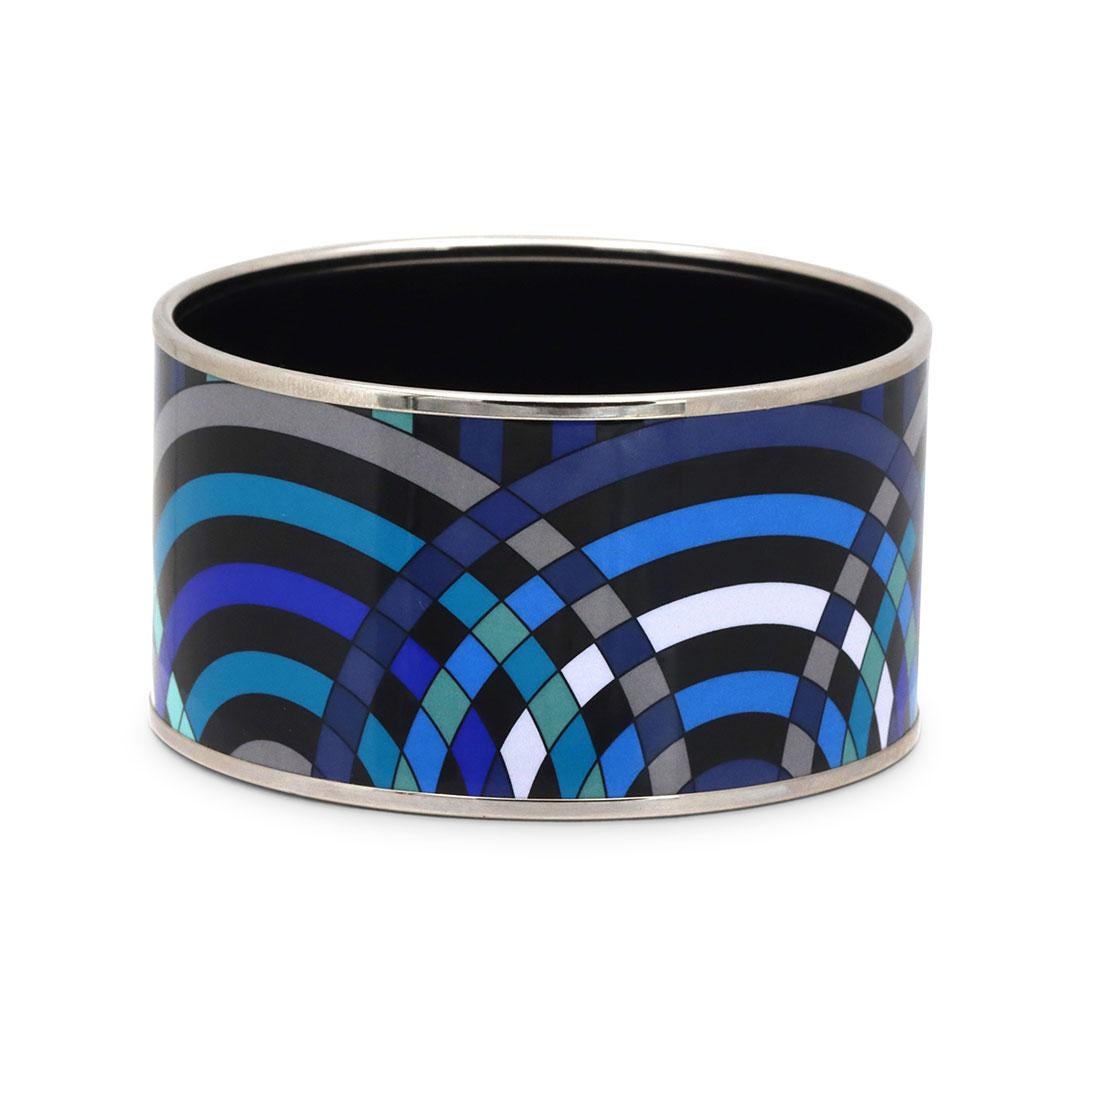 Authentic Hermès Paris bangle features multi-colored enamel work. Signed Hermès Paris, Made in France, +P.  Will fit up to a 7-inch wrist. The bangle is not presented with the original box or papers. CIRCA 2010s.

Brand: Hermes
Metal: Palladium